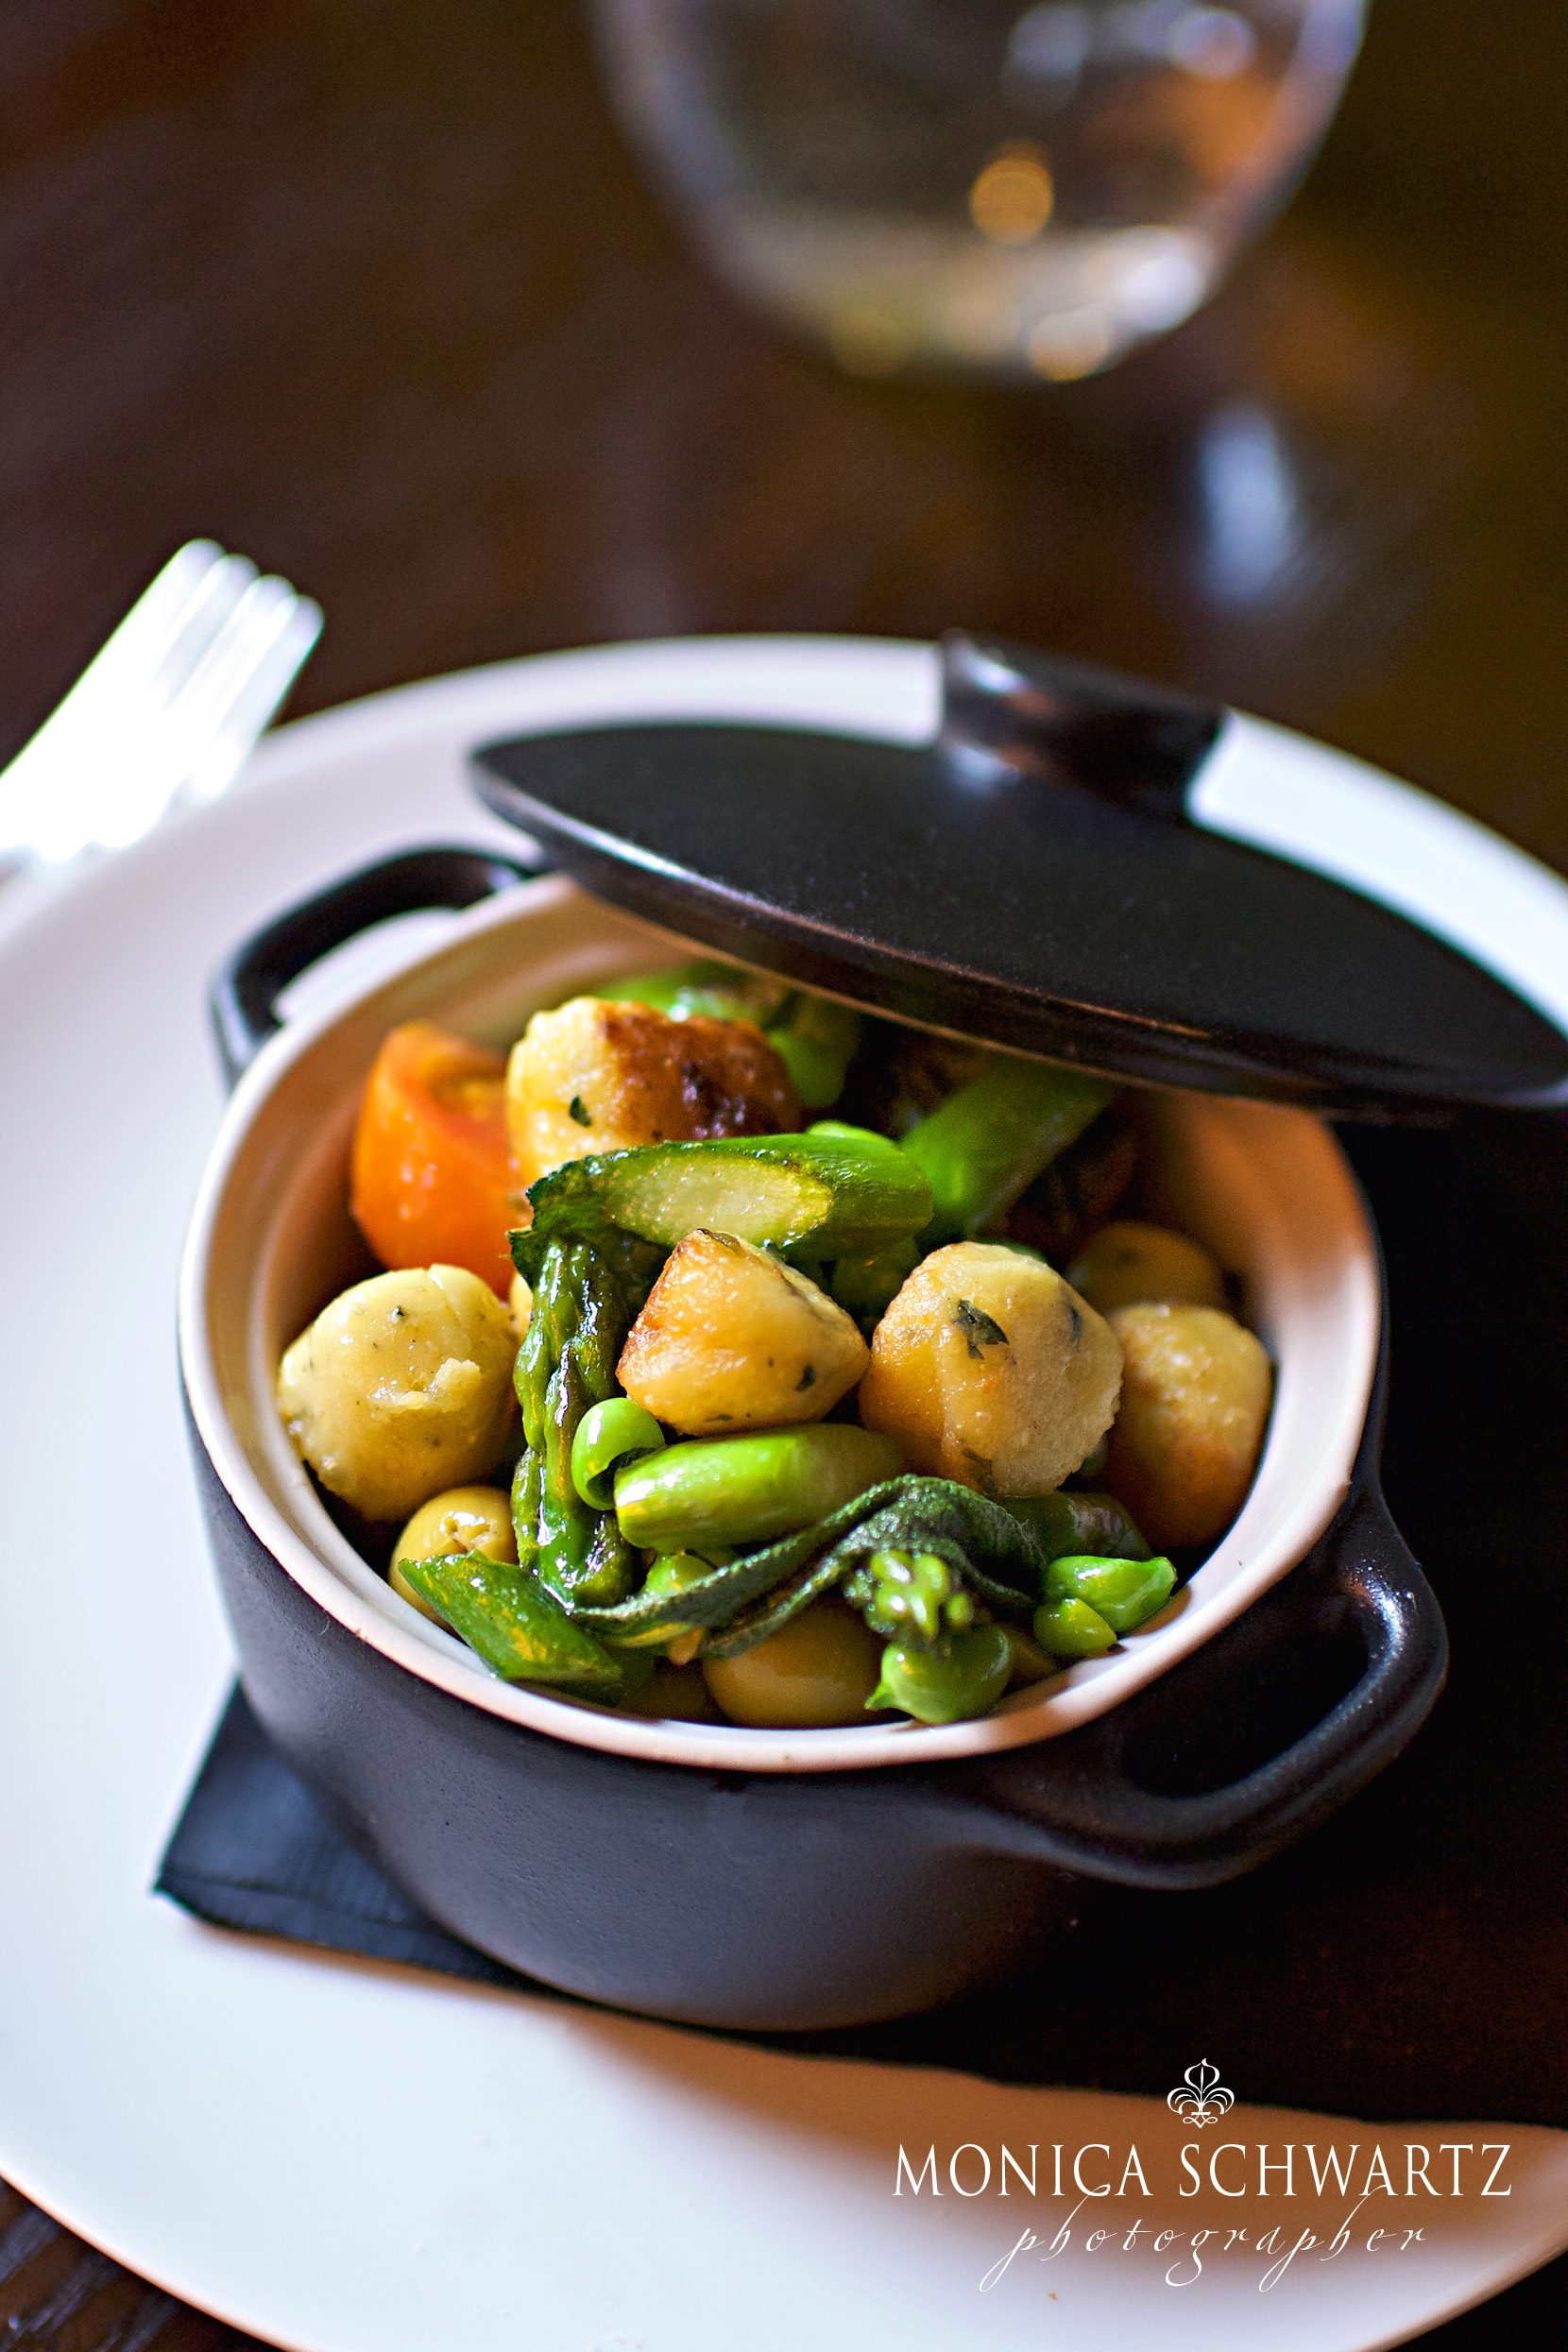 Herb-gnocchi-with-spring-vegetables-at-Basil-Restaurant-in-carmel-by-the-Sea-California